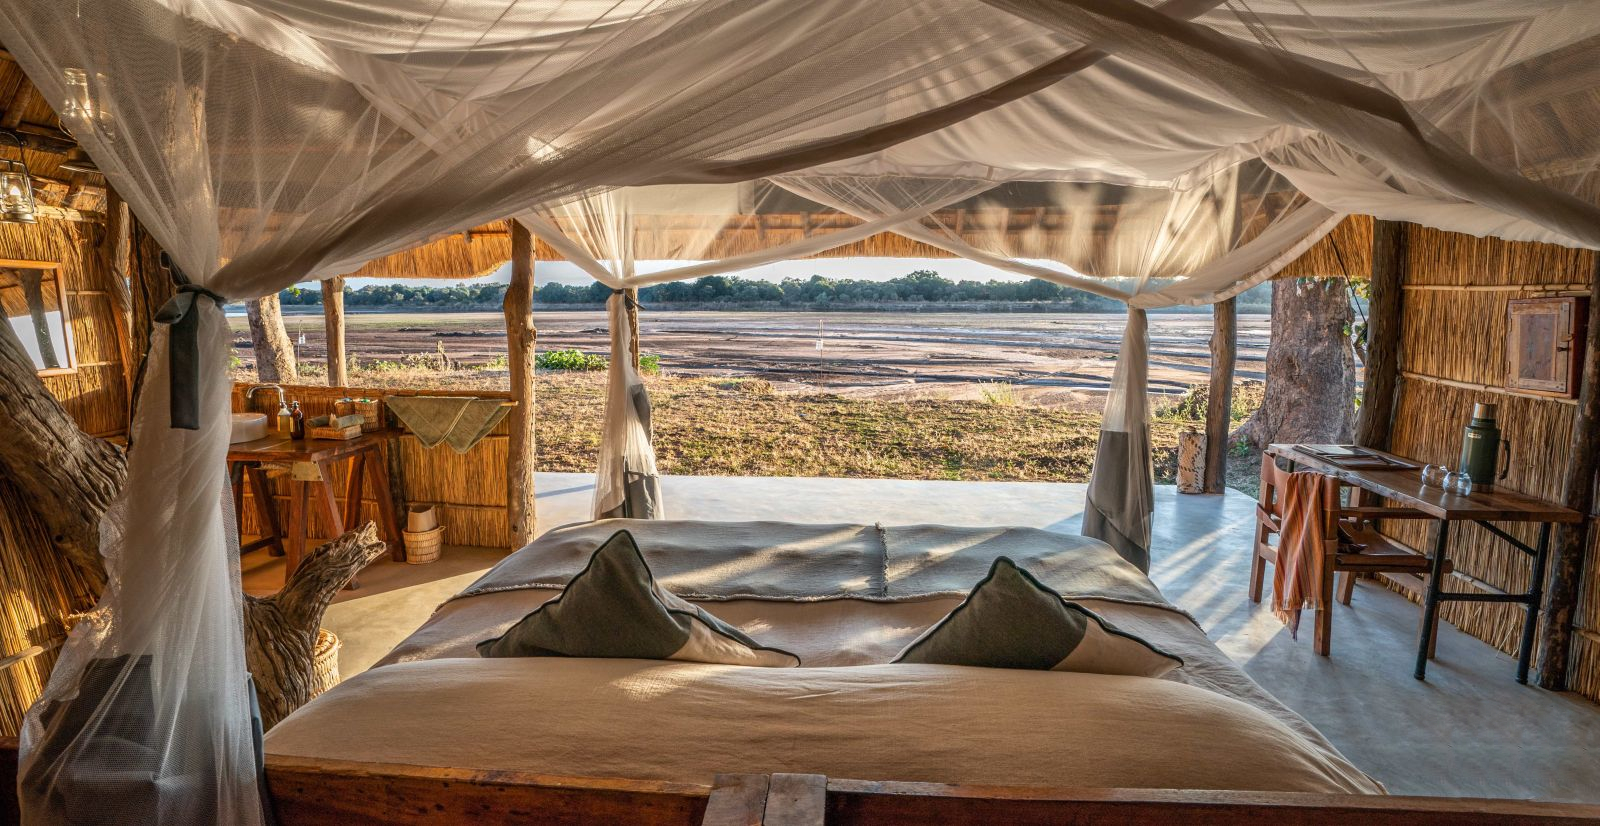 View from a chalet with ensuite bathroom and private terrace over the dried river bed at luxury safari camp Kakuli Bush Camp in Zambia's South Luangwa National Park